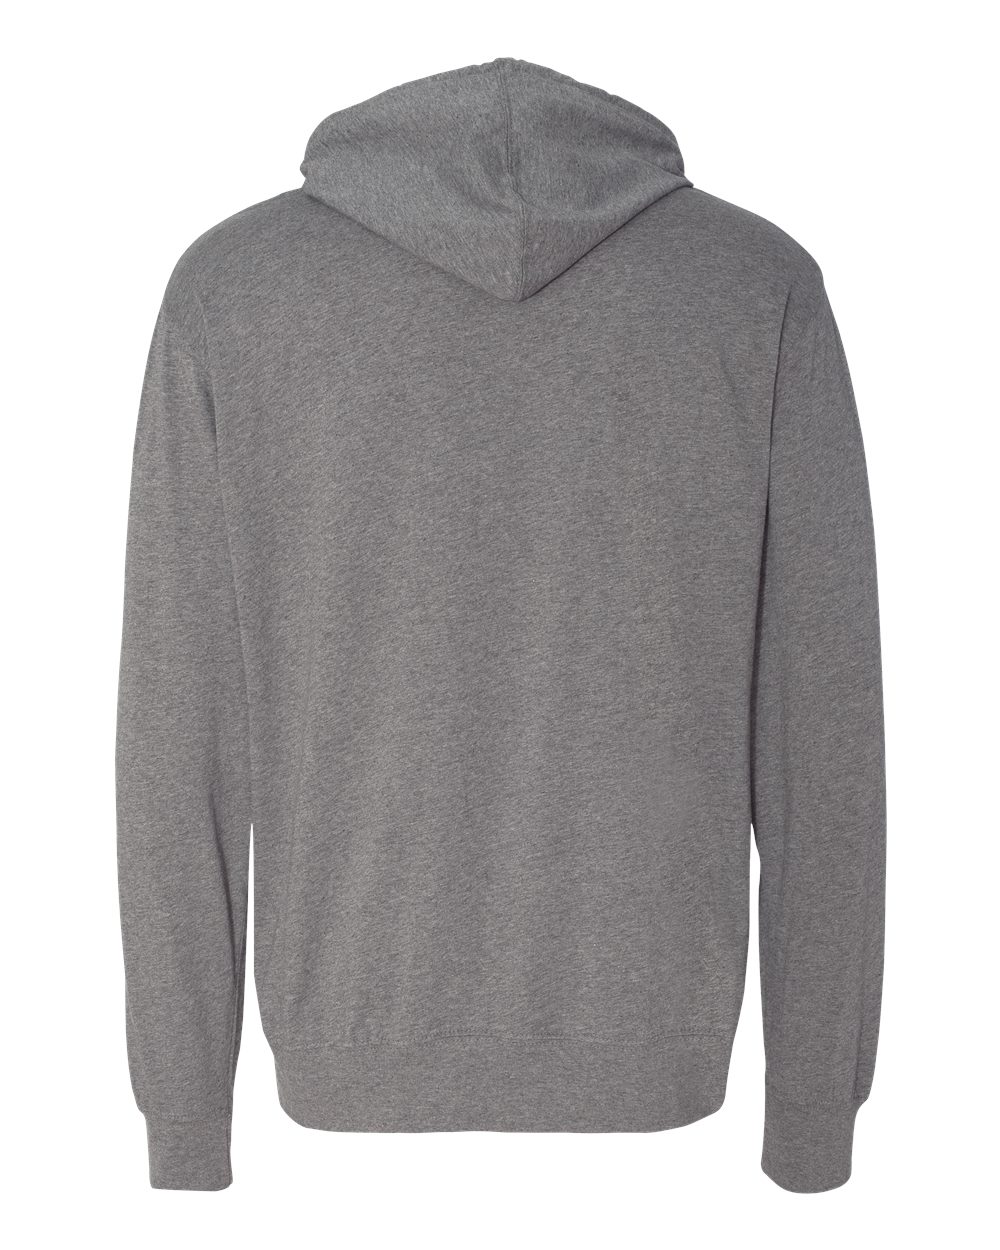 Independent Trading Co. SS150J | Lightweight Hooded Pullover T-Shirt ...